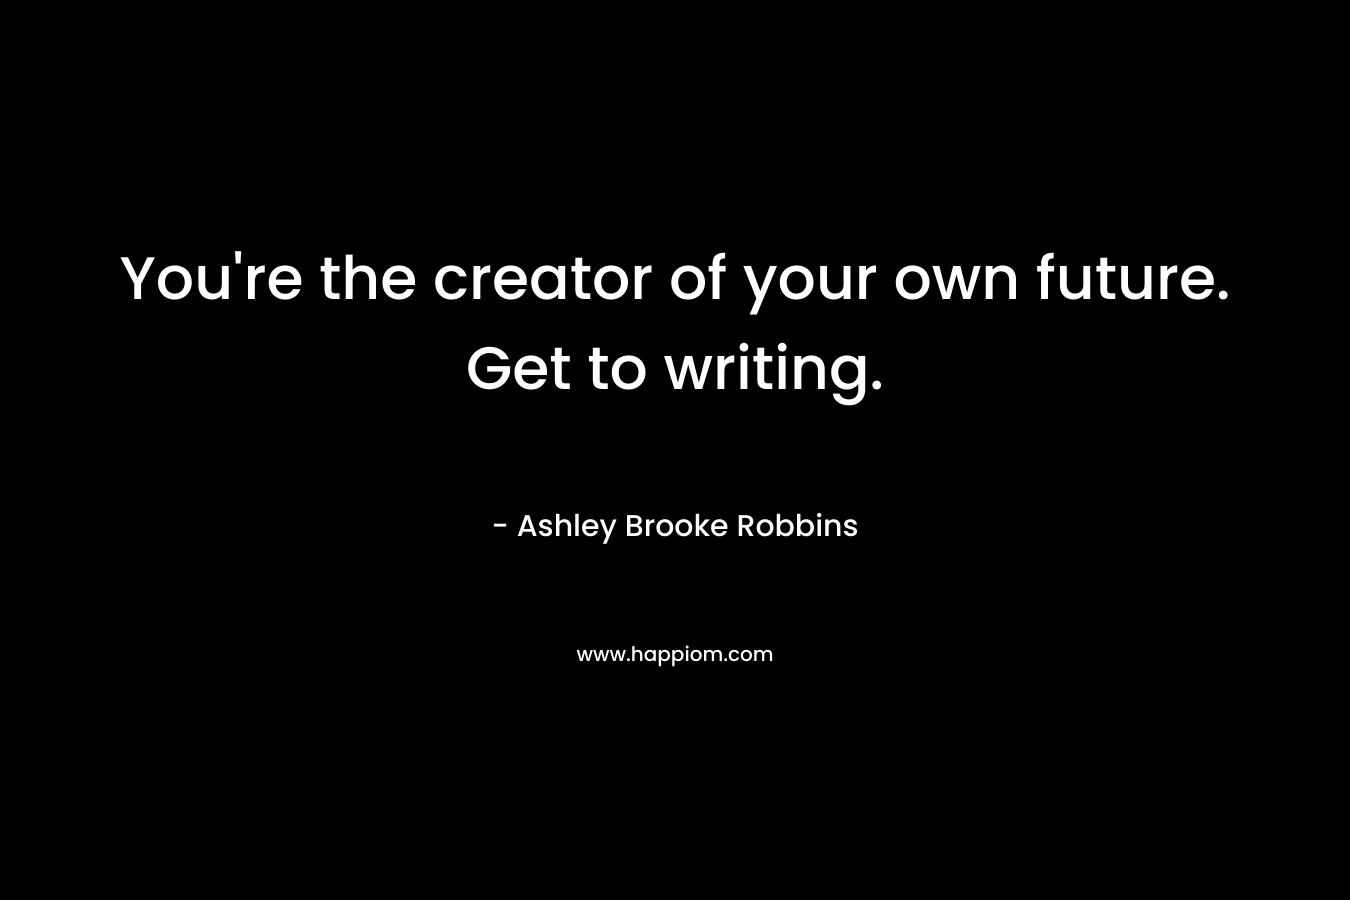 You're the creator of your own future. Get to writing.